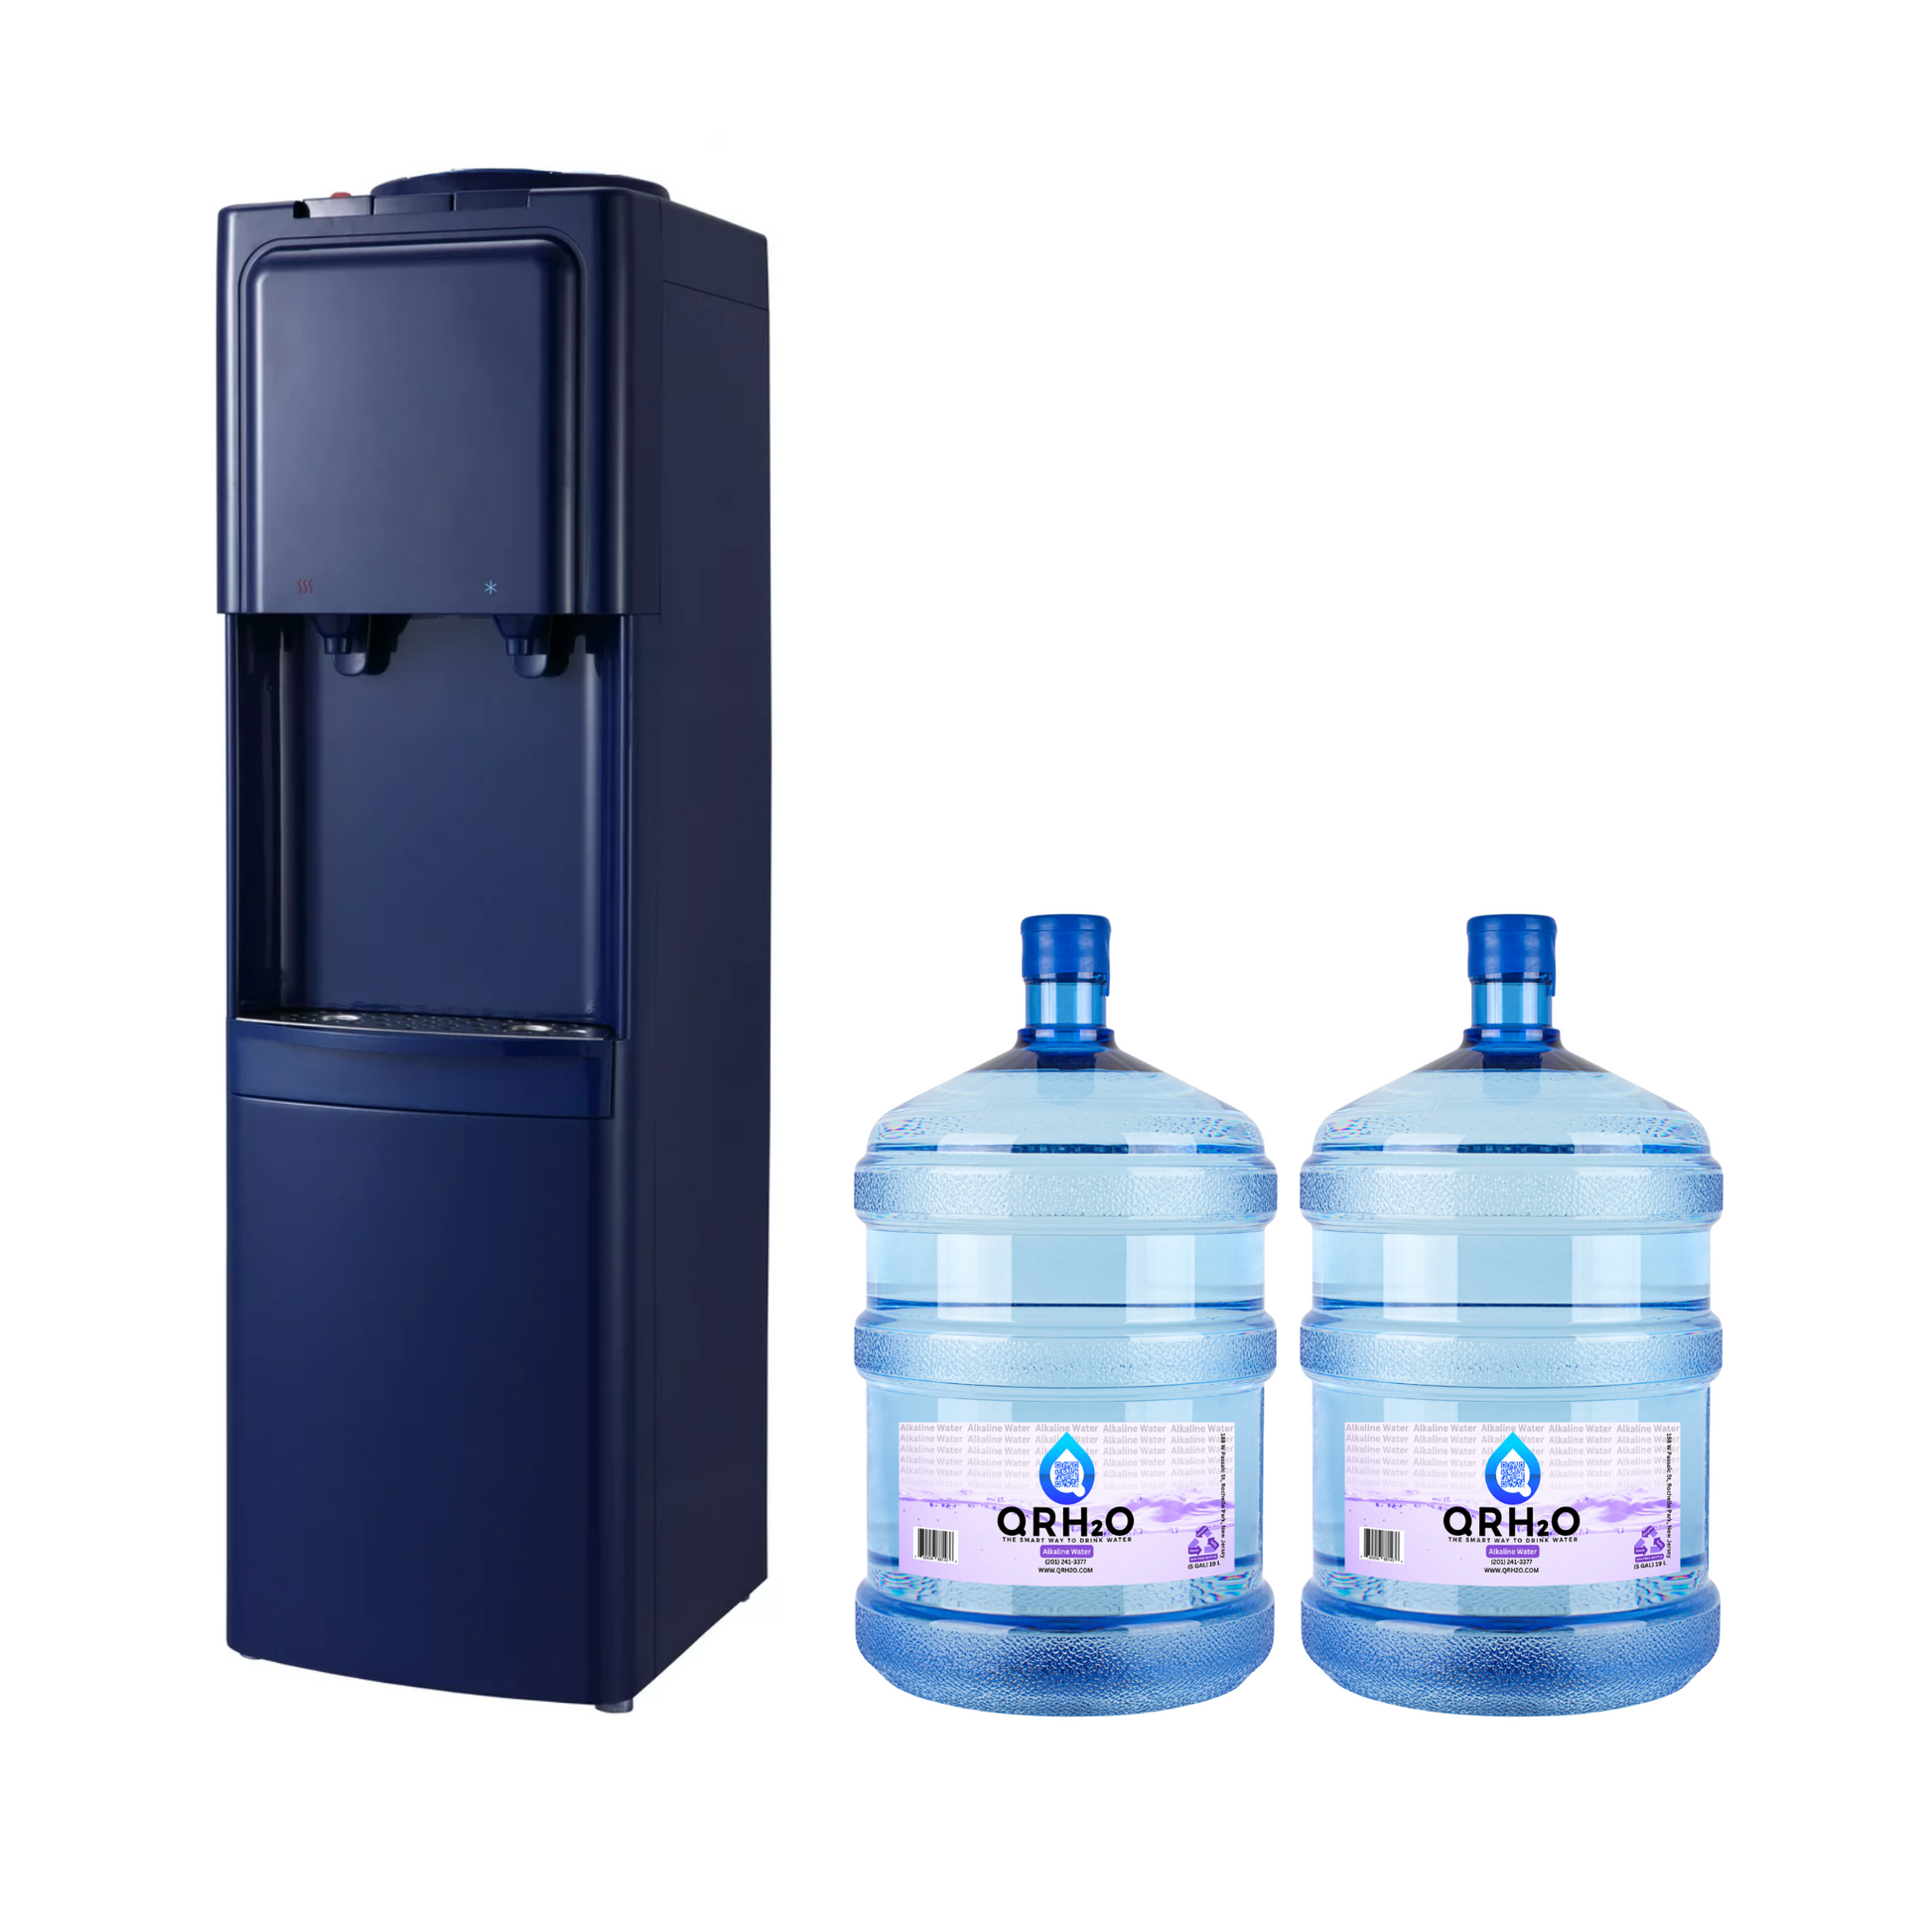 Get hot and cold water on demand with the Primo top-loading water dispenser, which comes with two 5-gallon water bottles in a sleek navy blue design.